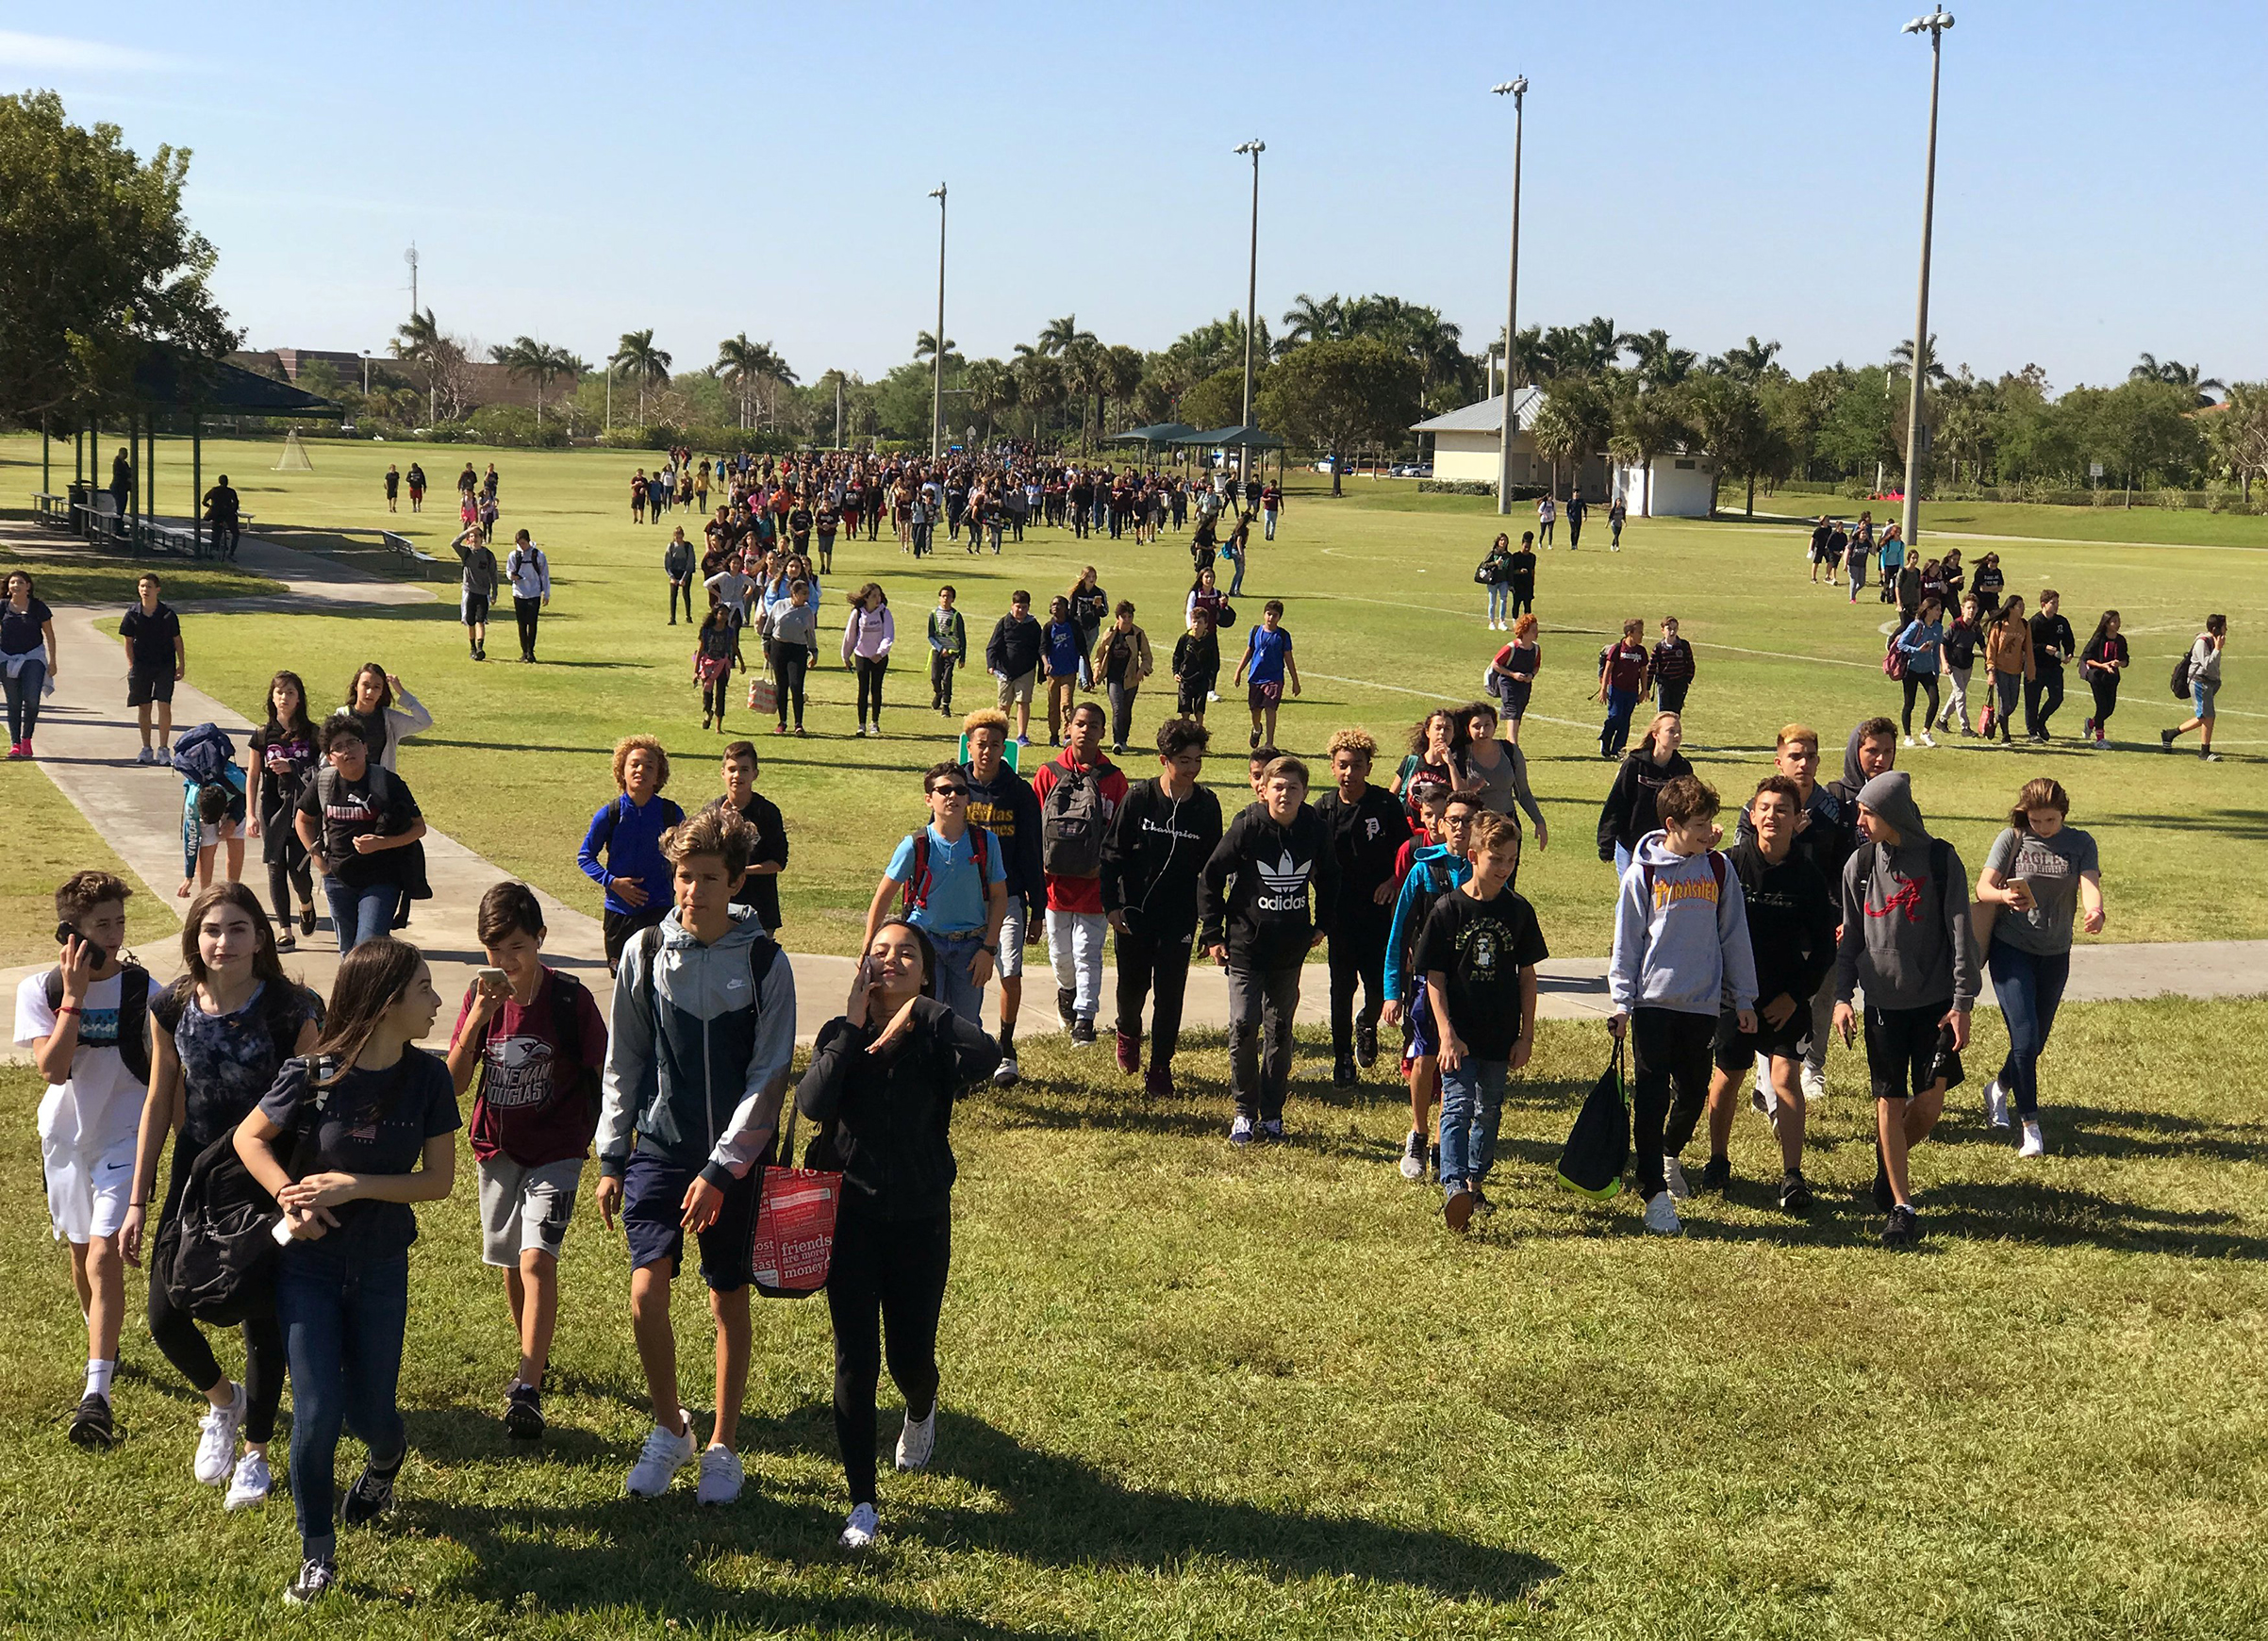 Students from West Lakes Middle School and Marjory Stoneman Douglas High School walkout during National School Walkout to protest gun violence in Parkland, Fla., March 14, 2018. (Joe Skipper—Reuters)